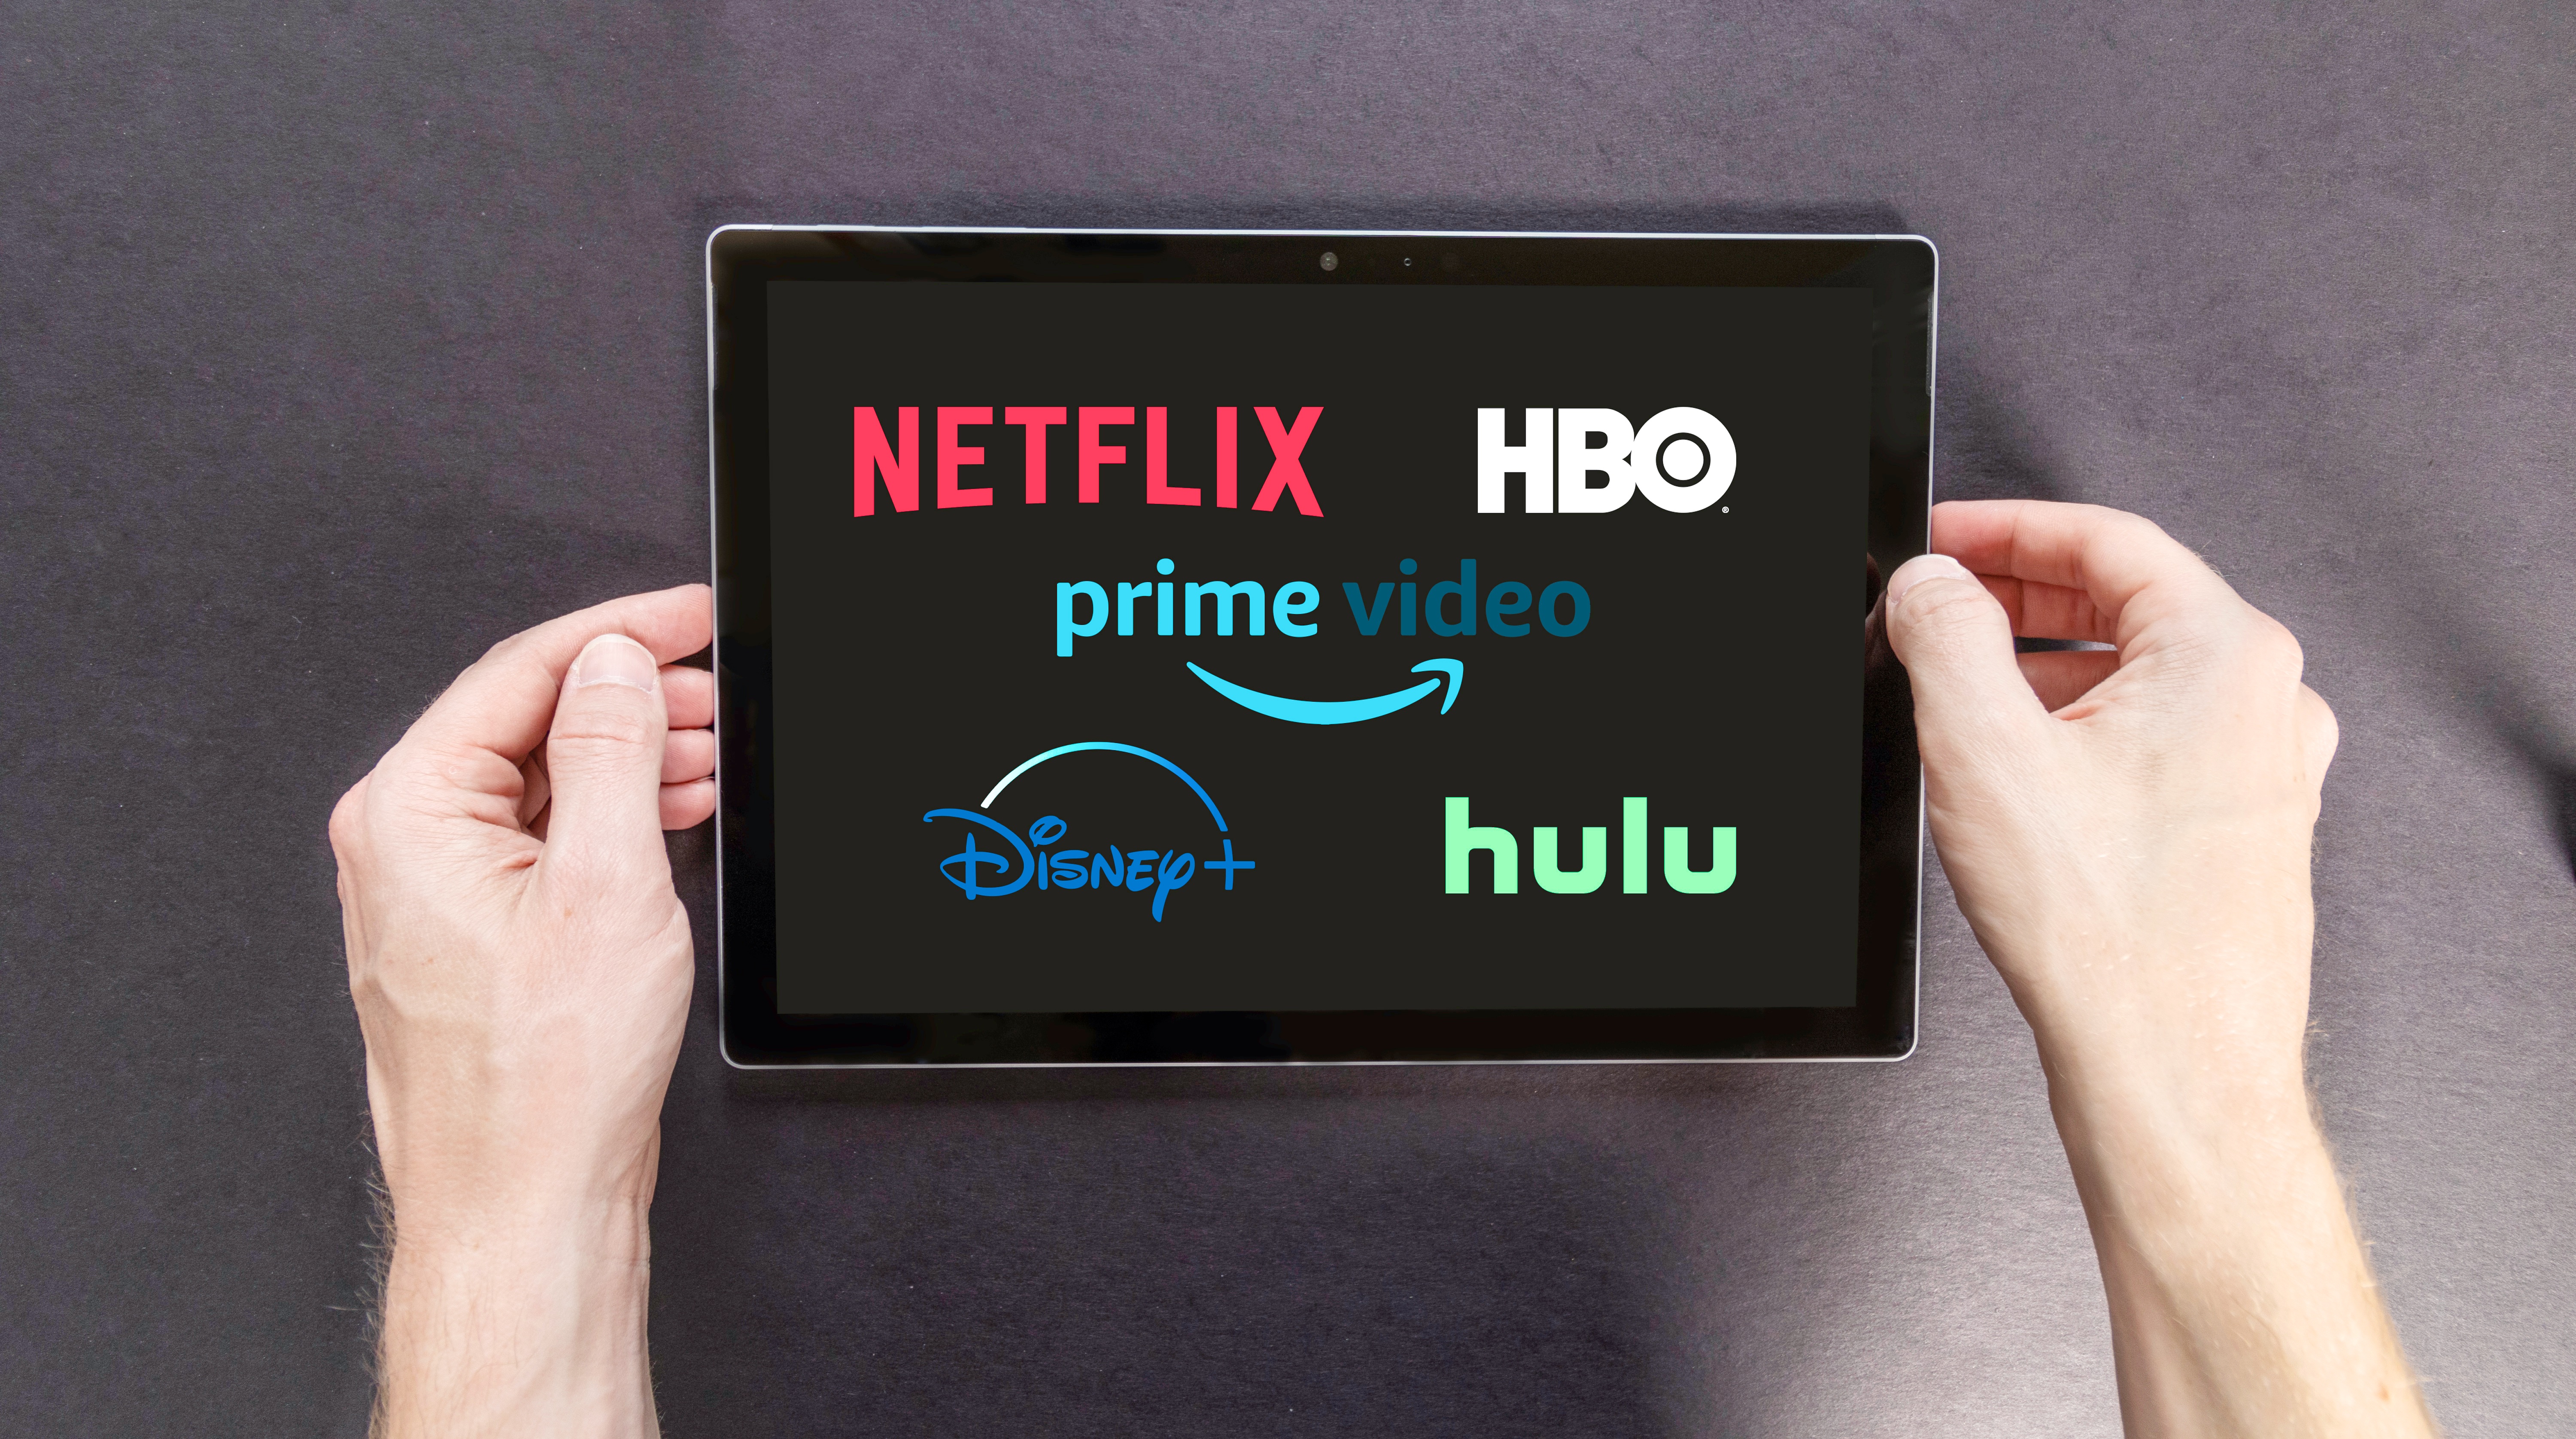 Netflix, HBO, and Prime logos on the tablet